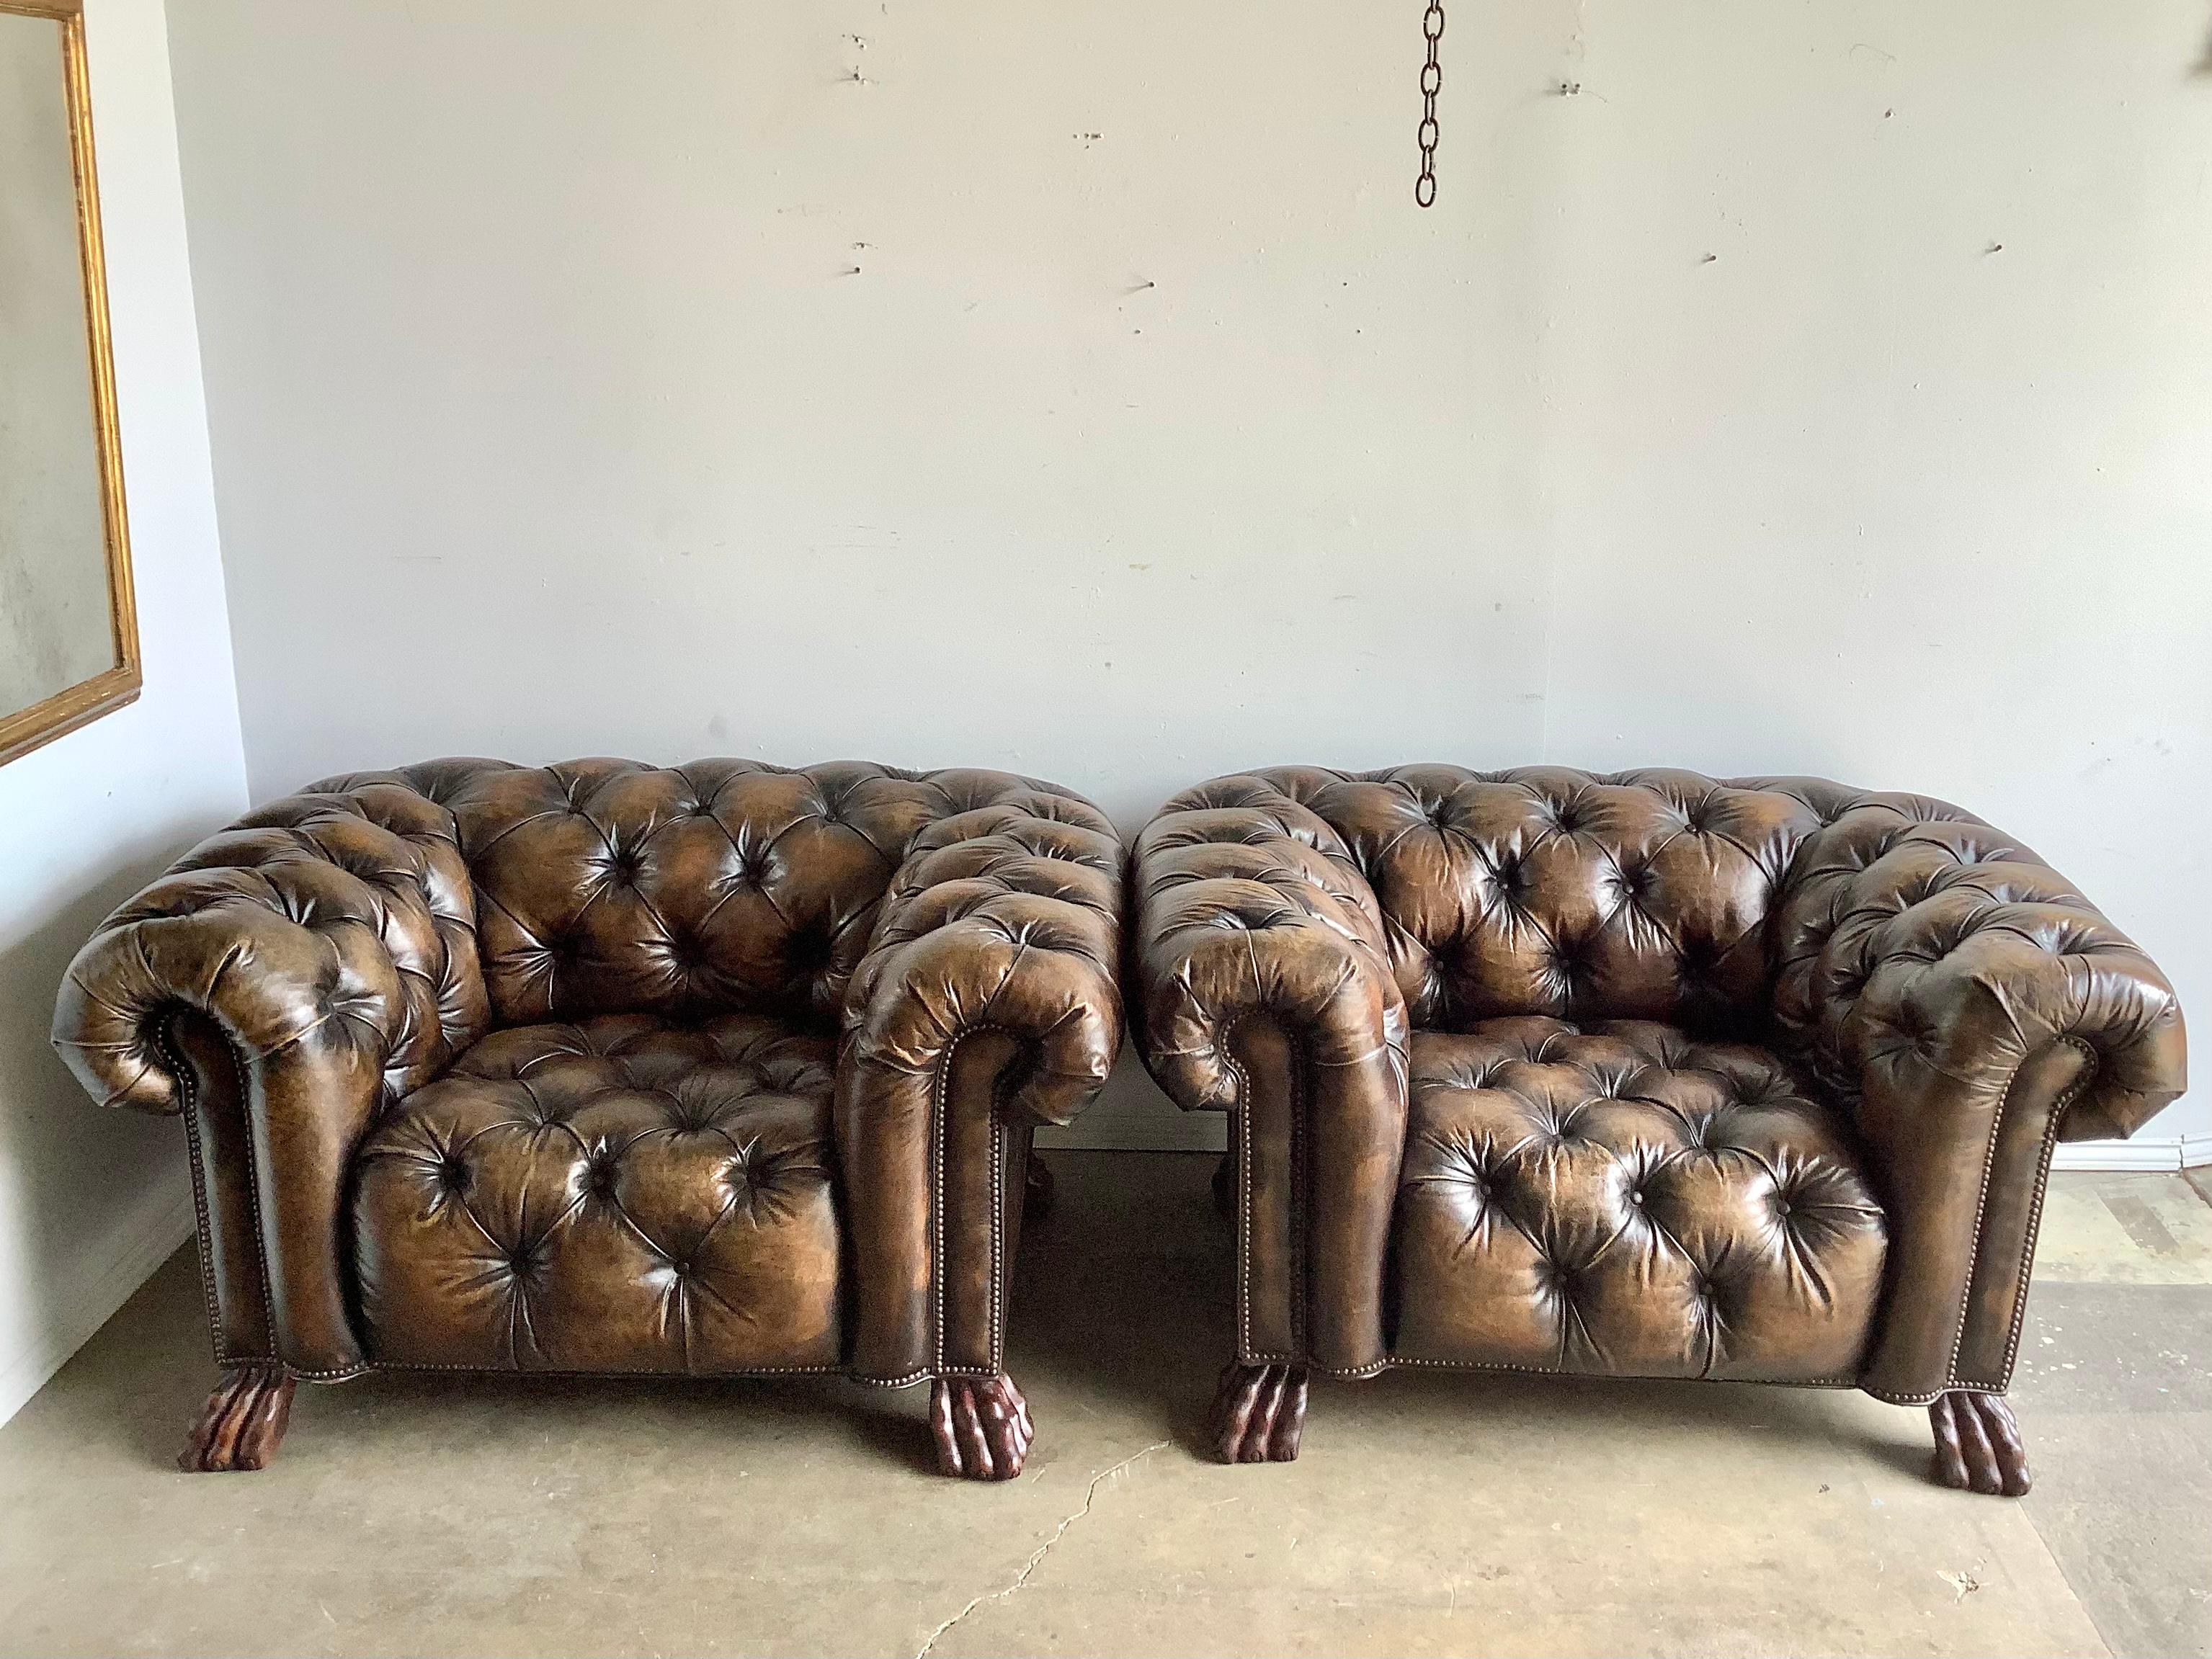 Pair of English leather tufted Chesterfield style armchairs standing on carved wood Lion Paw Feet. The chairs are upholstered in a beautiful tobacco color that has worn well throughout the years. Great overall condition.